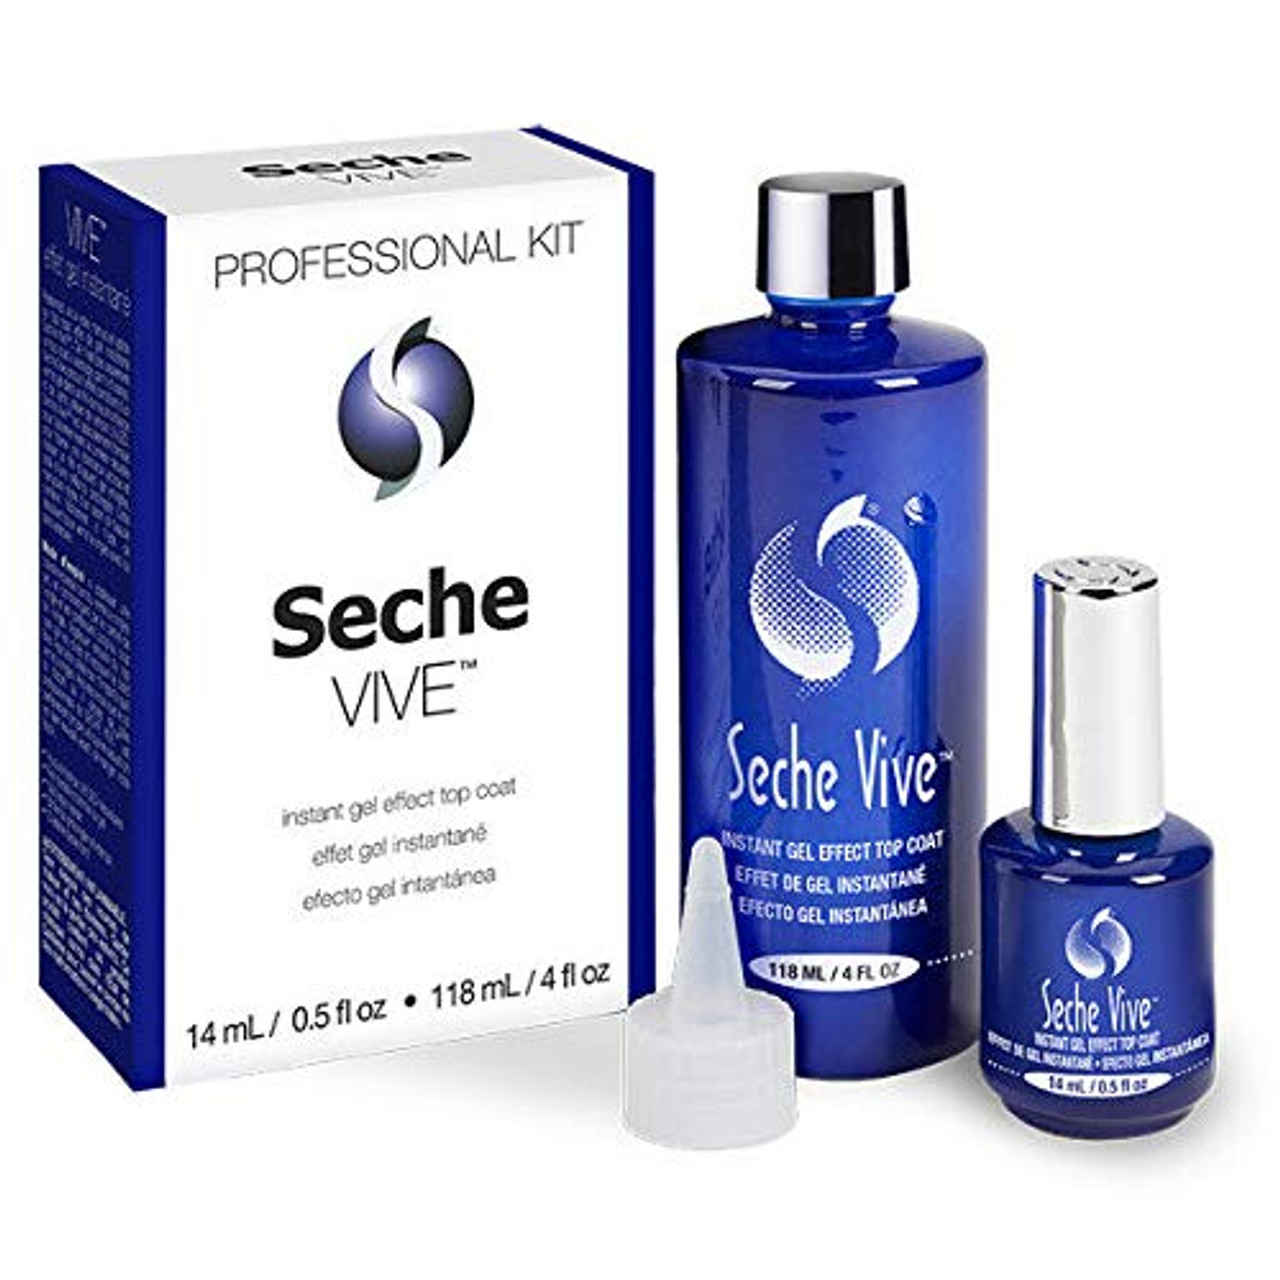 Seche Pro Callus Remover Kit The World's Top Winning Nail Care Dry Fast Top  Coat